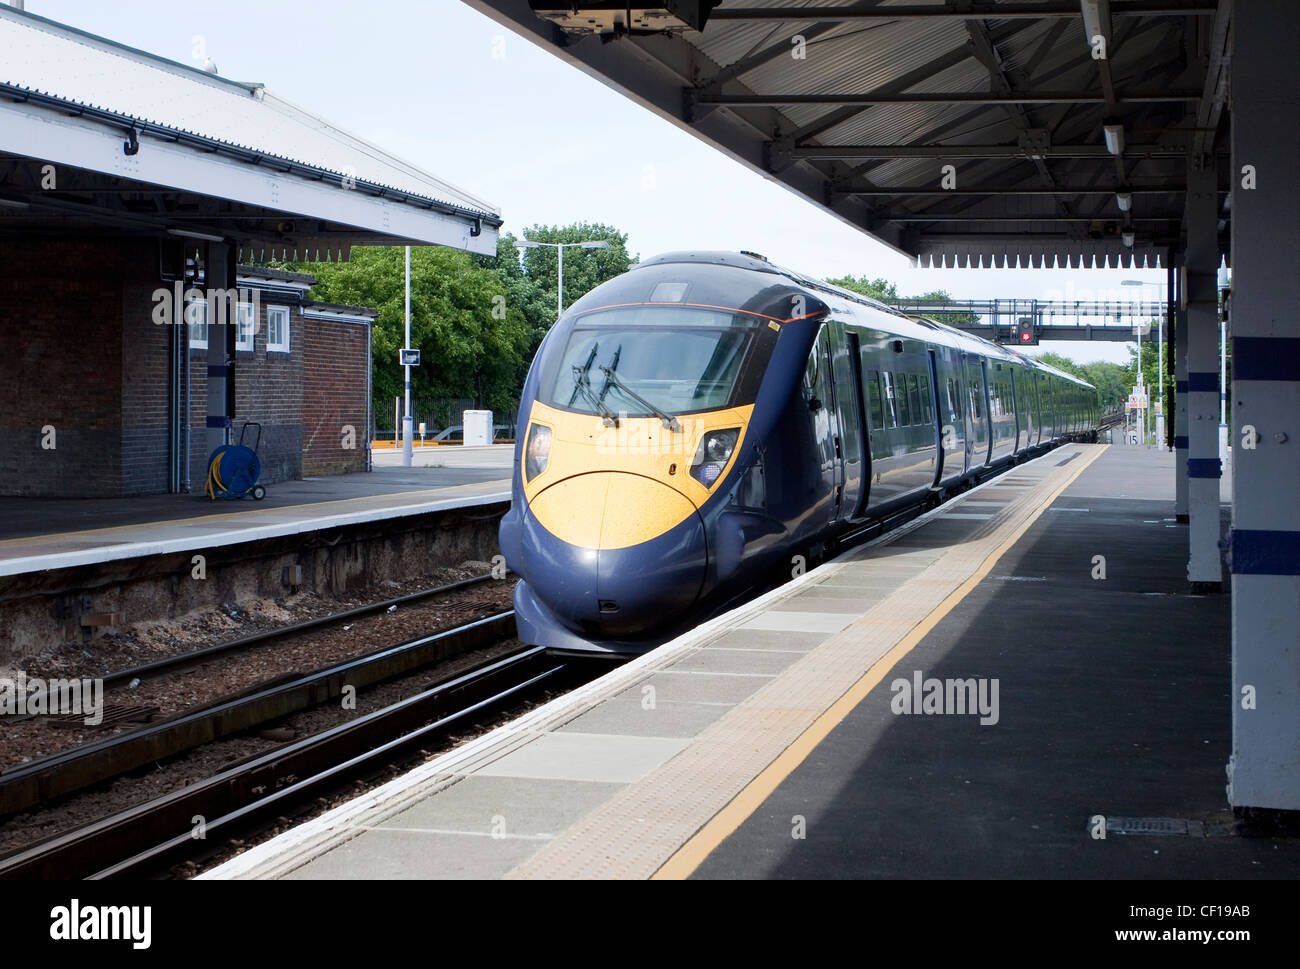 Javelin Train Southeastern Trains High Speed 1 HS1 140 mph Made by Hitachi Class 395 Broadstairs Station Kent UK Stock Photo